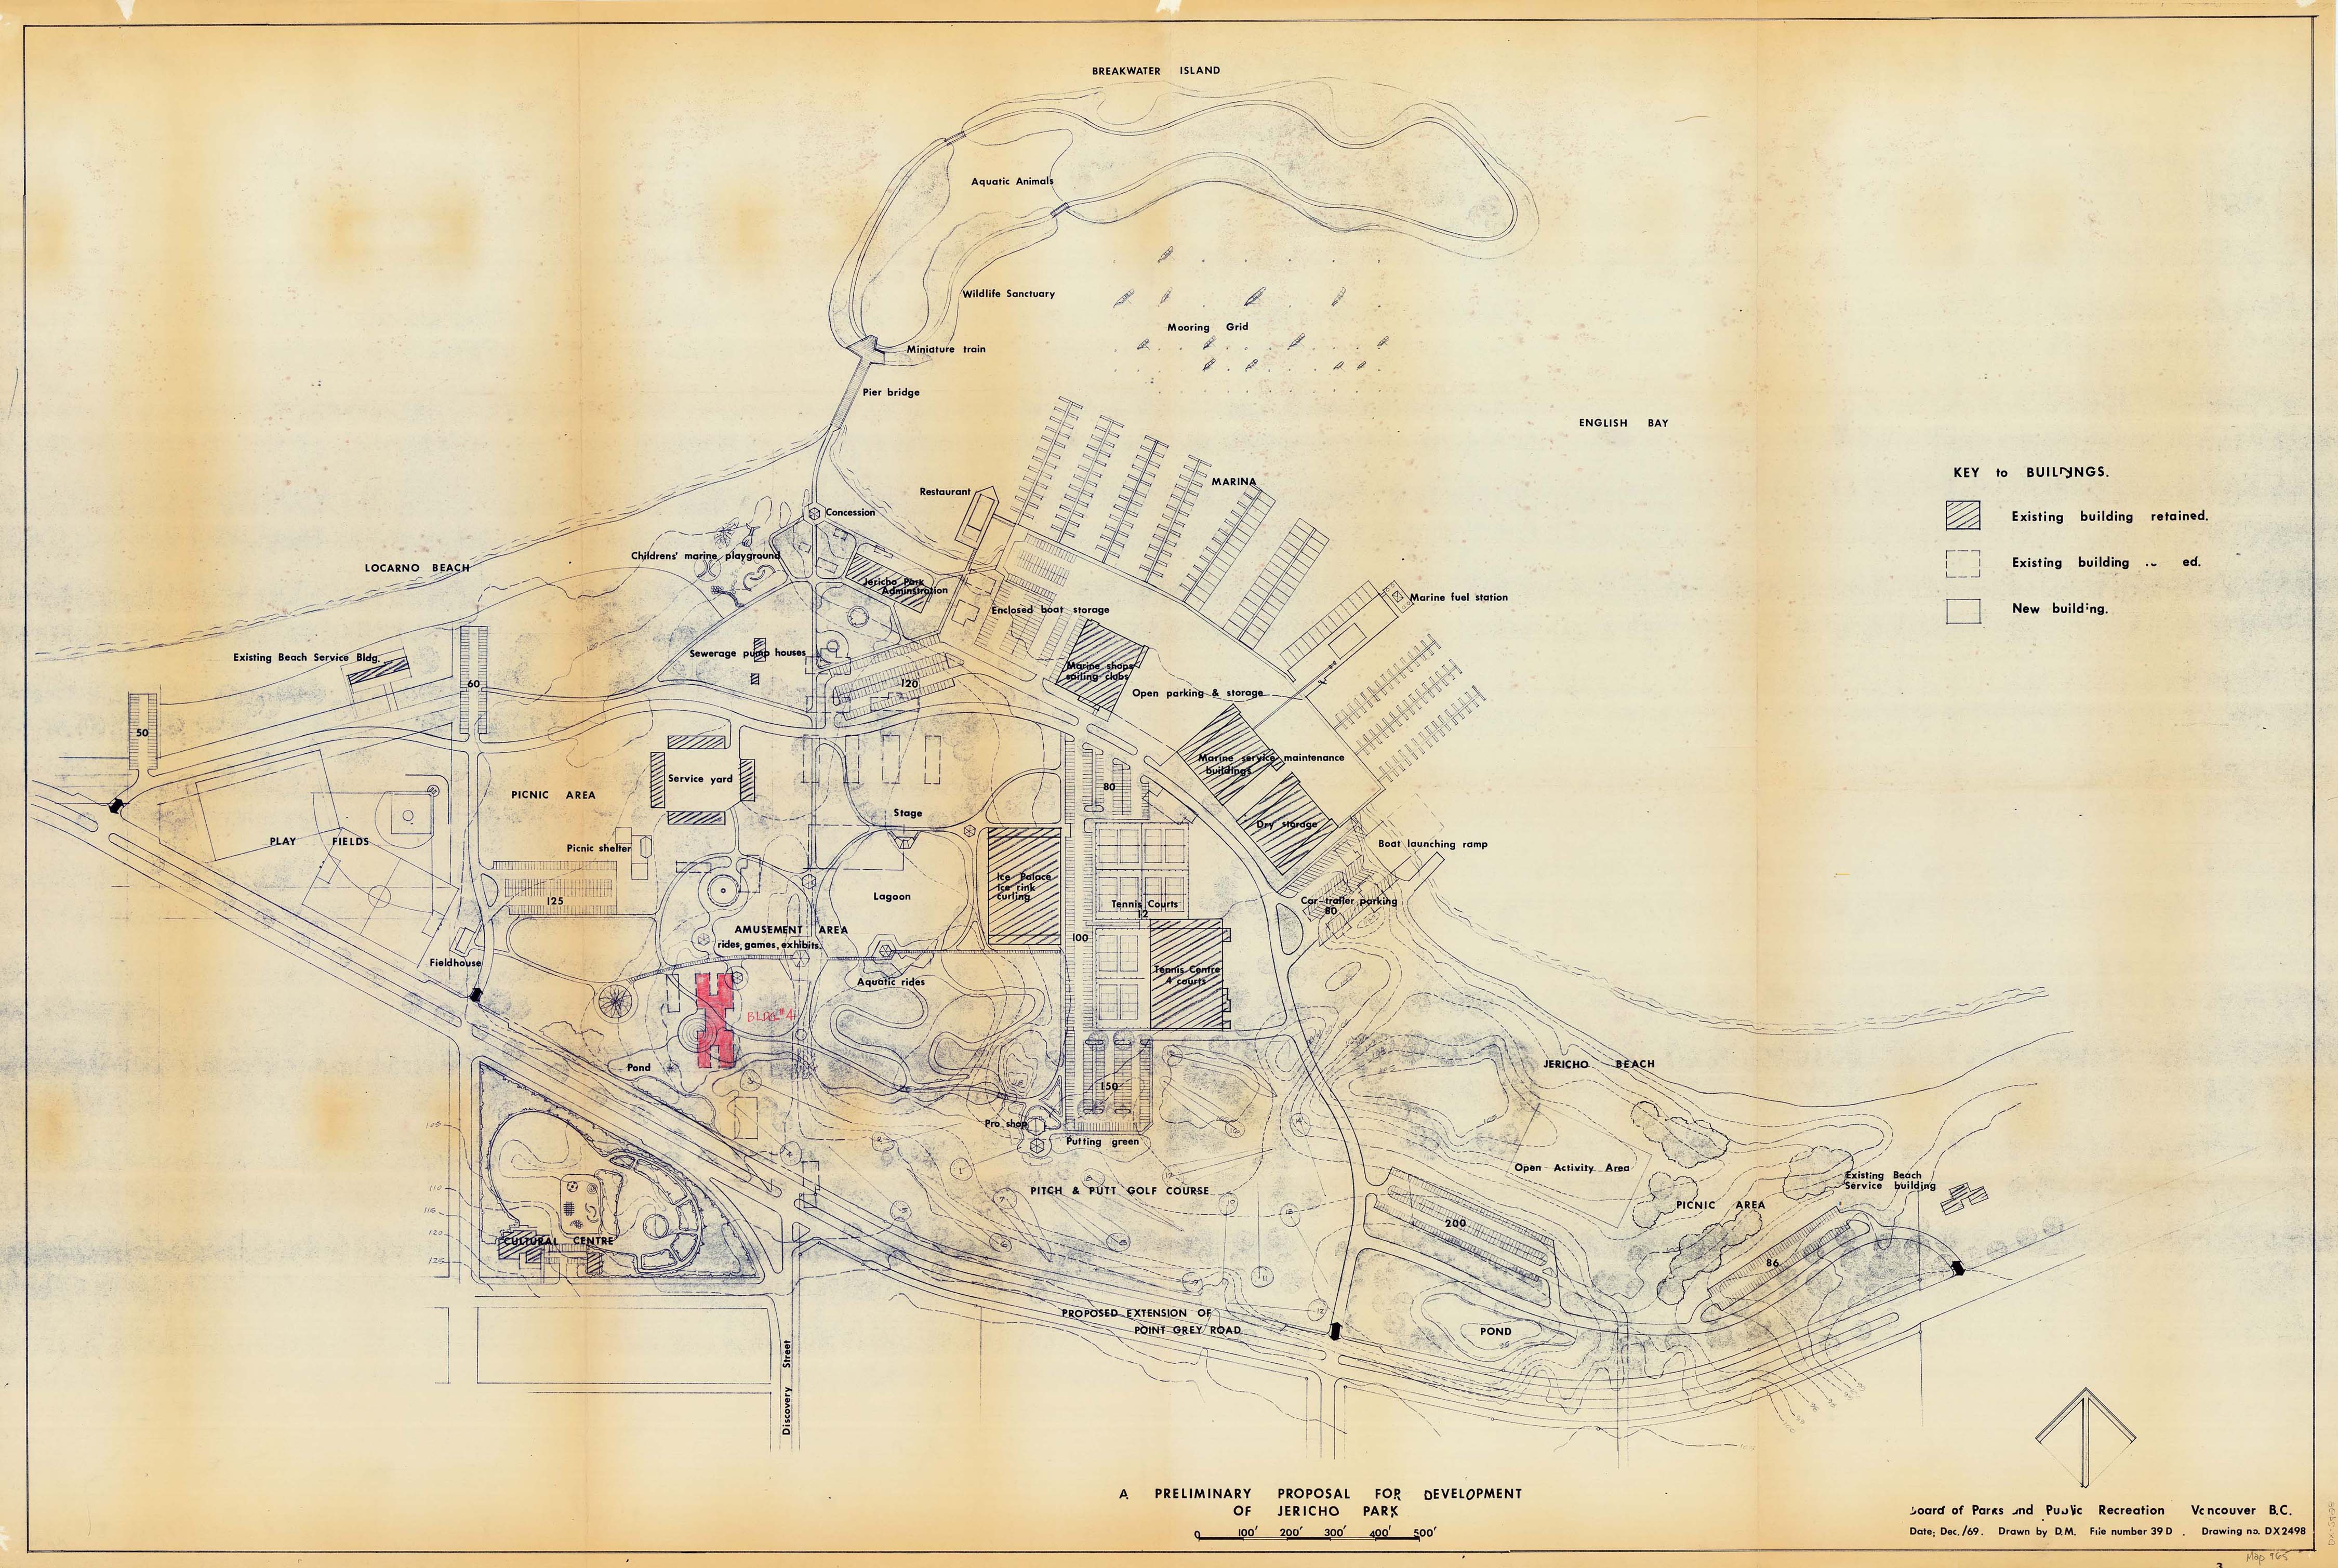 A preliminary proposal for development of Jericho Park, 1969. Reference code AM1594-: MAP 965.